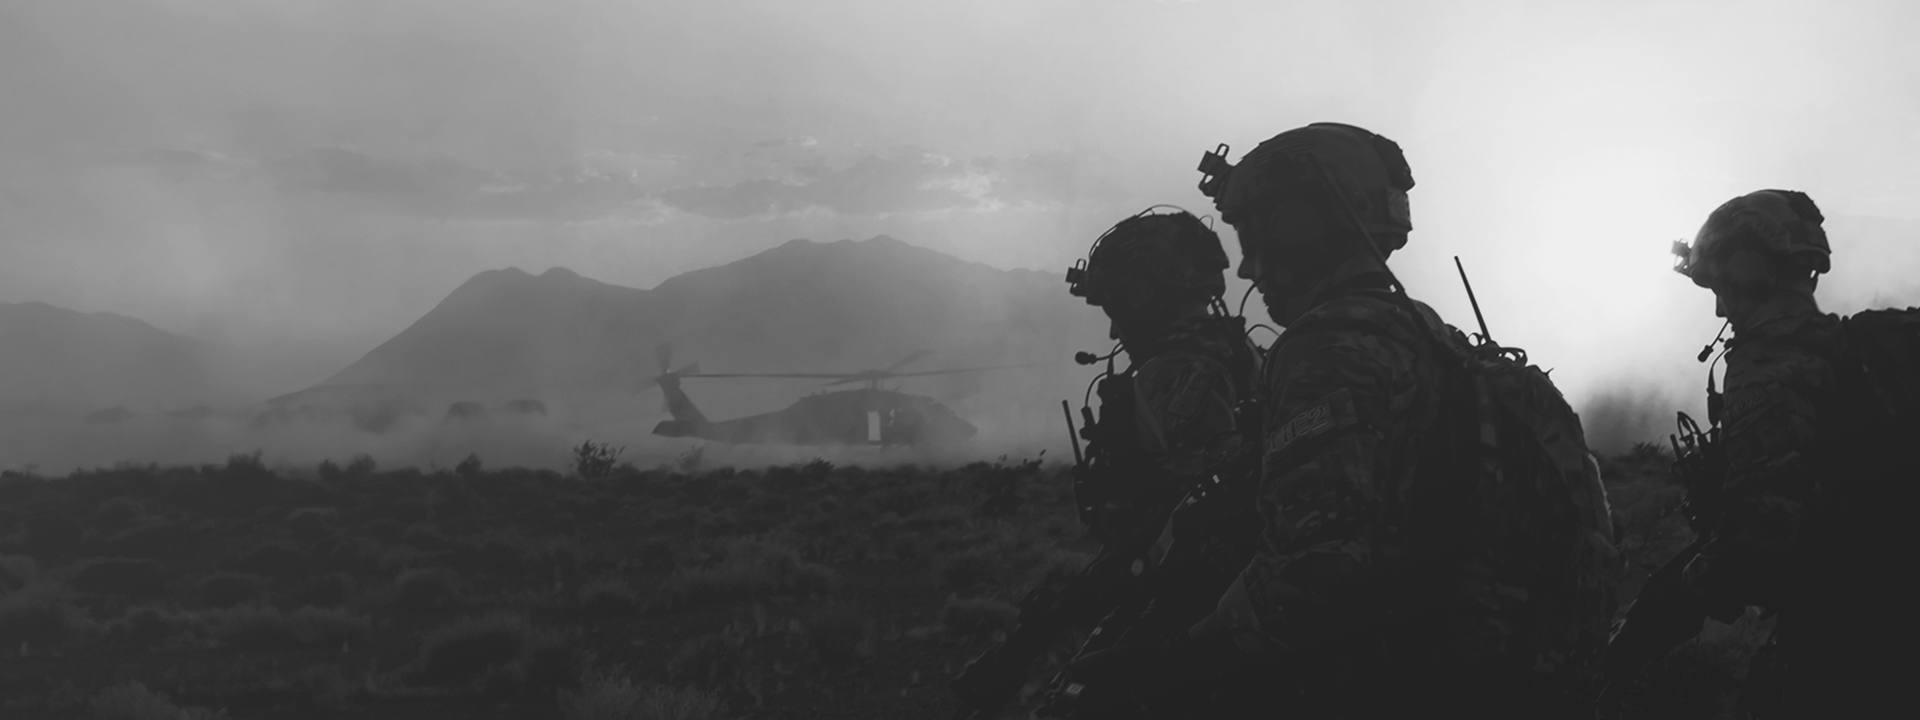 Three soldiers walking in the desert with a helicopter in the background